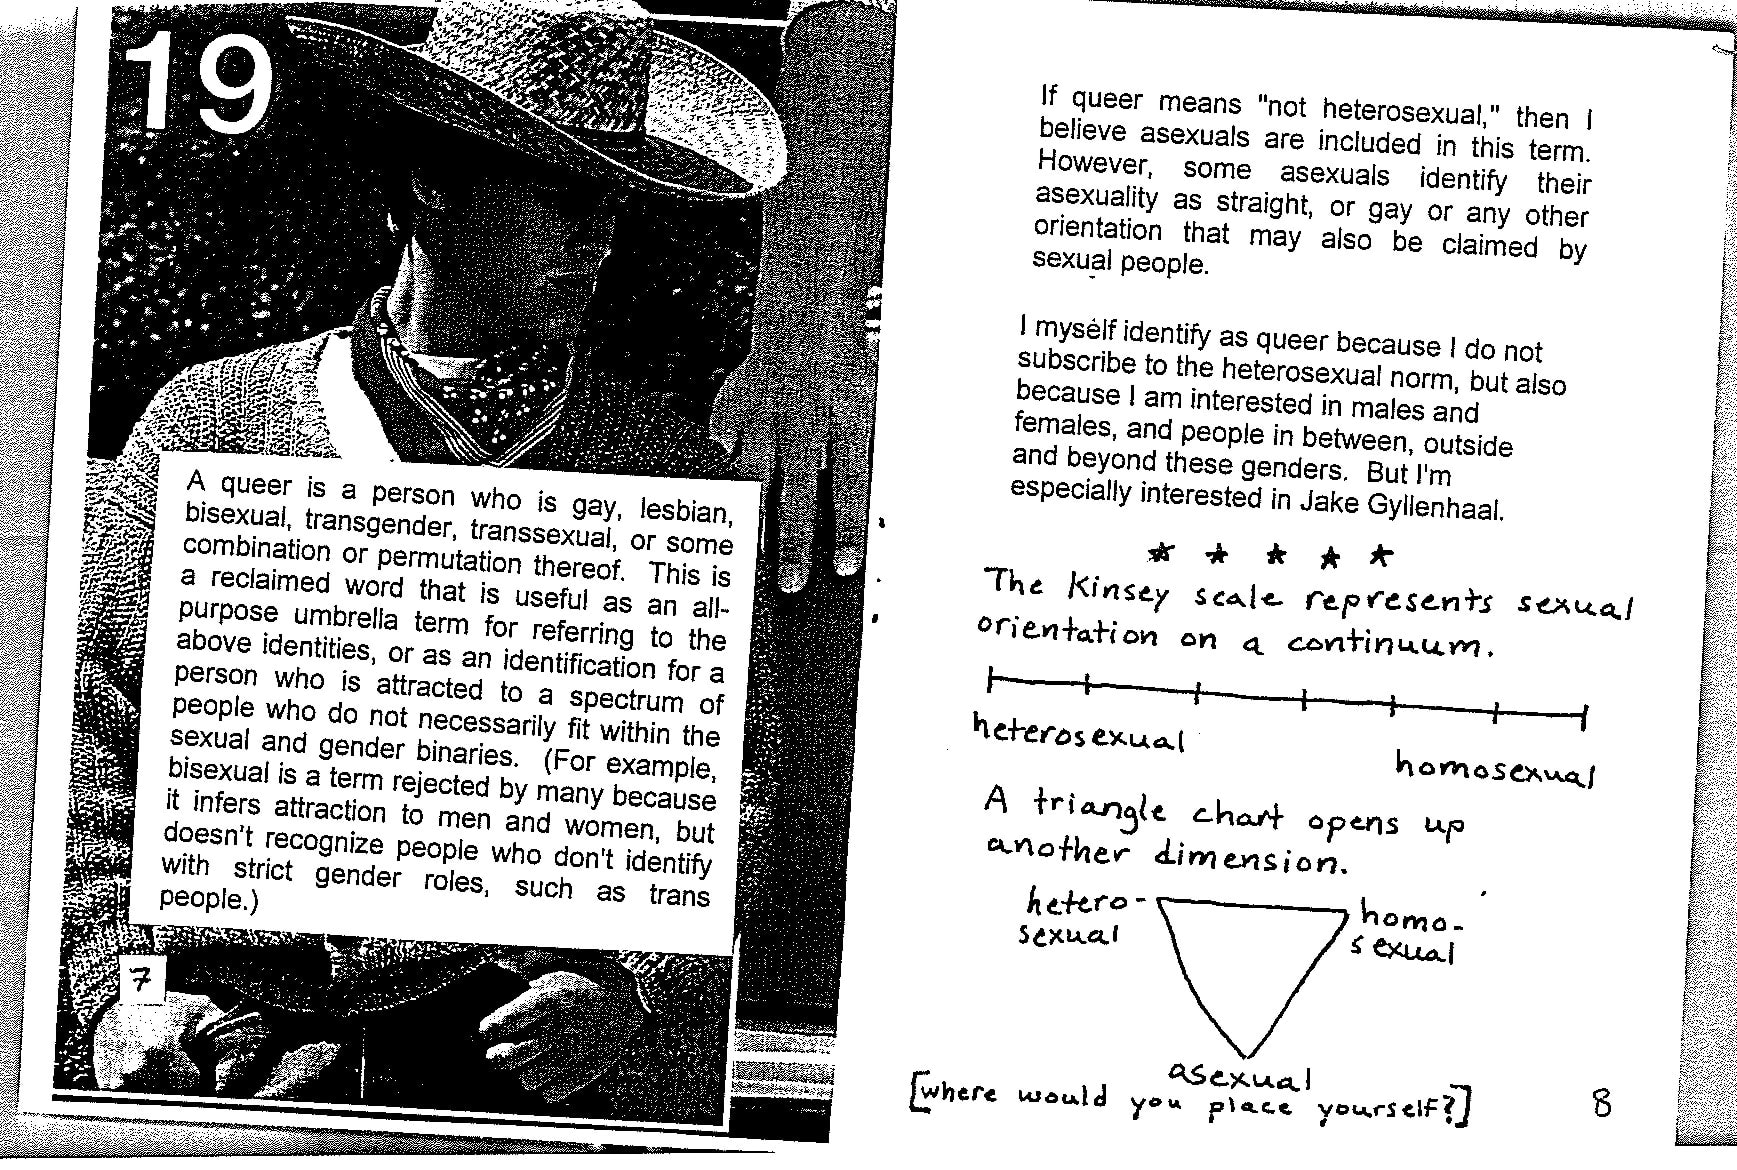 Typed text overlaid on a photo of a person wearing a cowboy hat and bandana. A photo of an arm reaching is collaged over top (left). Typed and handwritten text and hand-drawn diagrams of a linear Kinsey scale and a triangular scale (right).